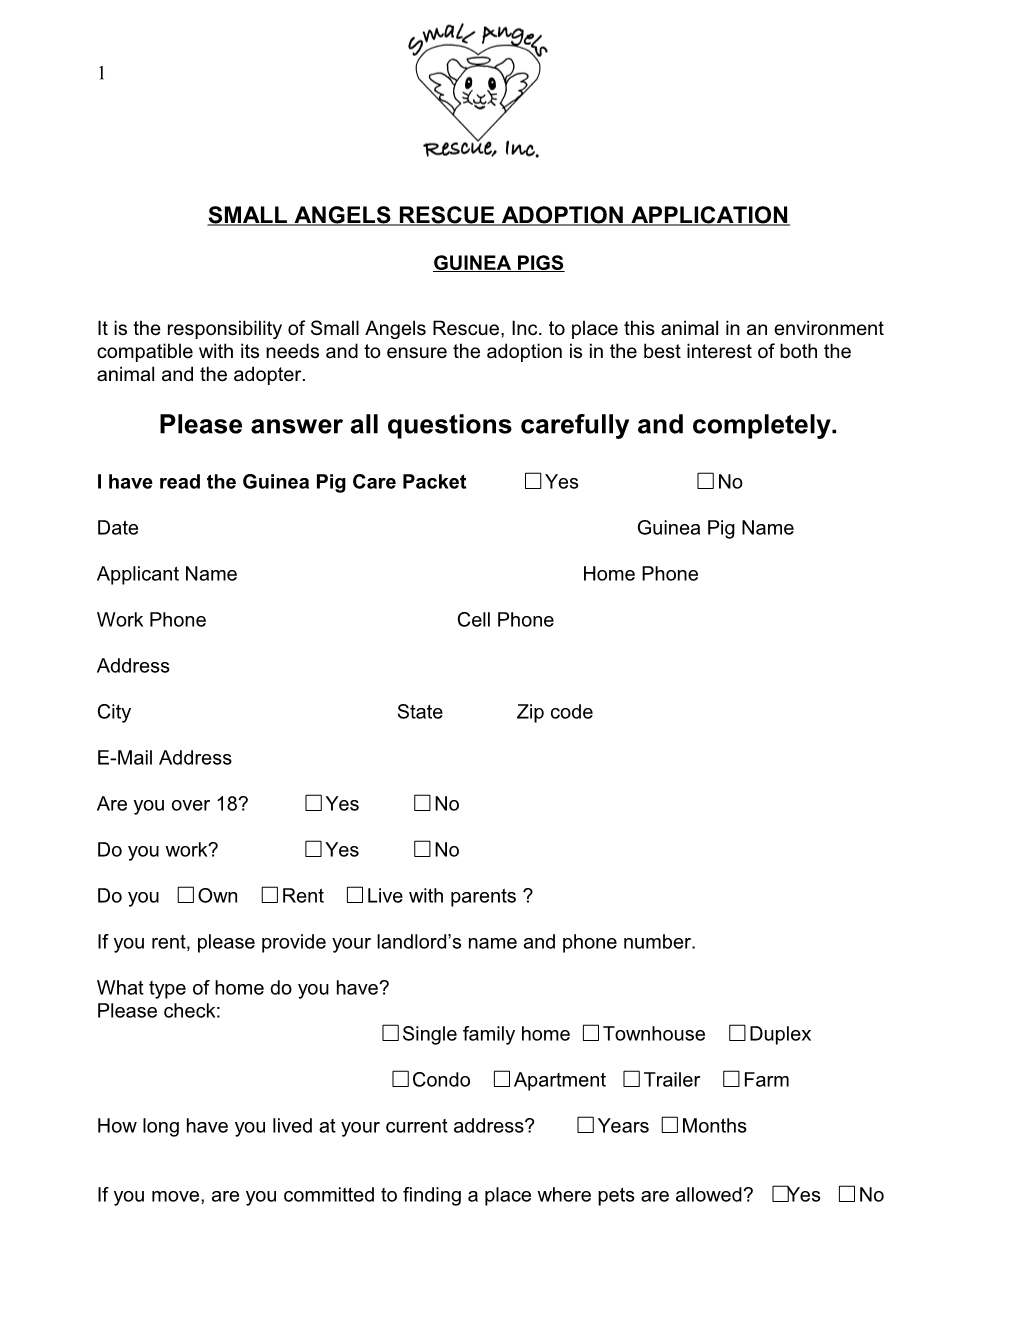 Small Angels Rescue Adoption Application s1